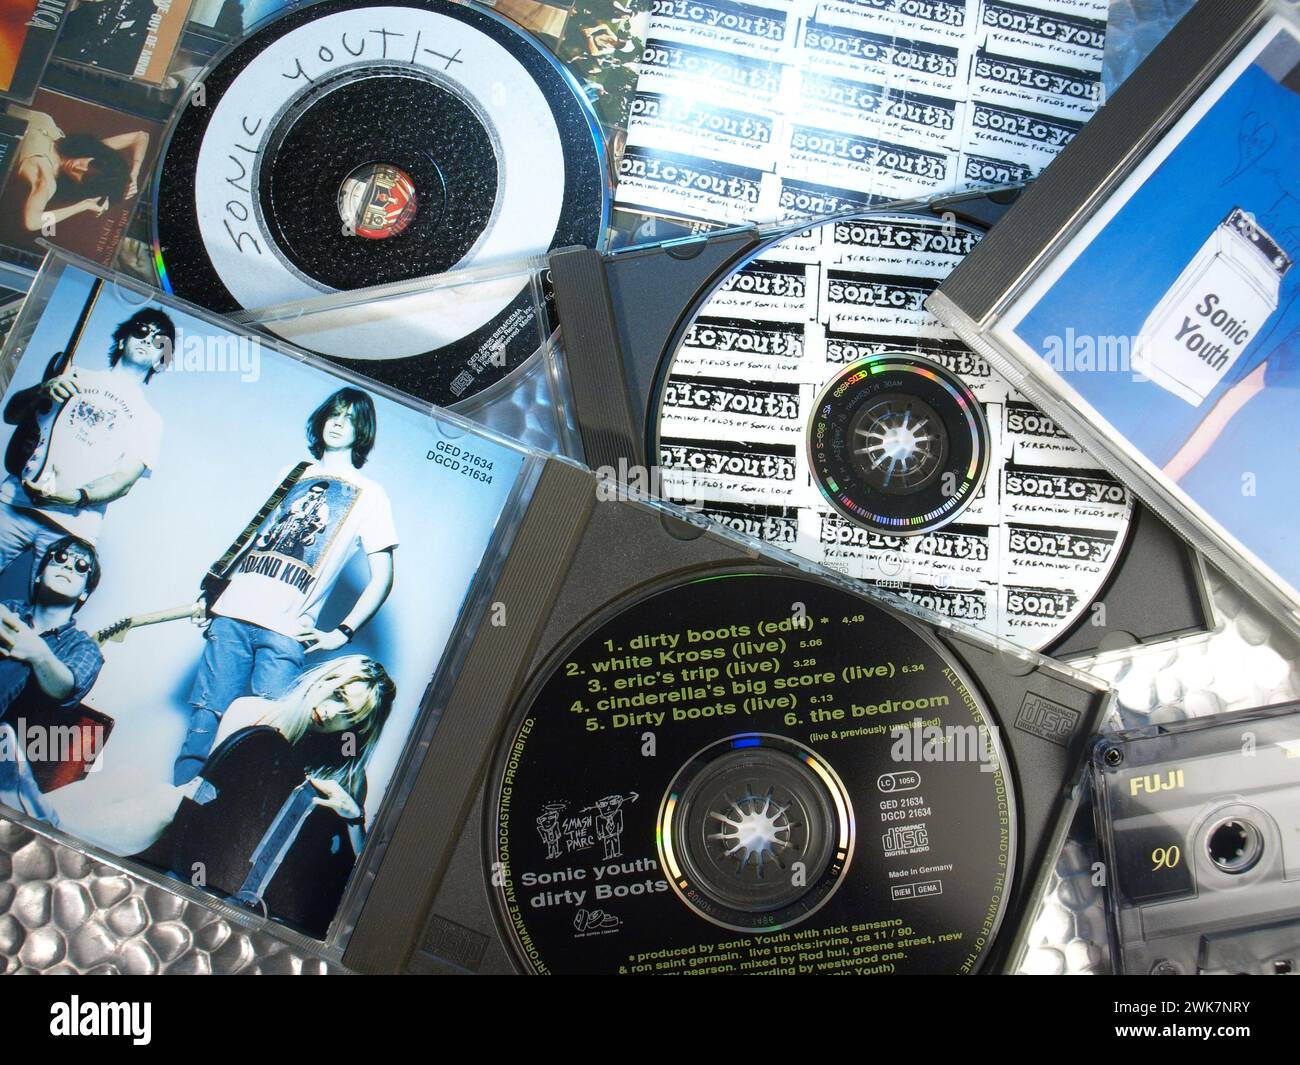 Musikausstellung - Sonic Youth CD - American Rock Band, New York City Stockfoto